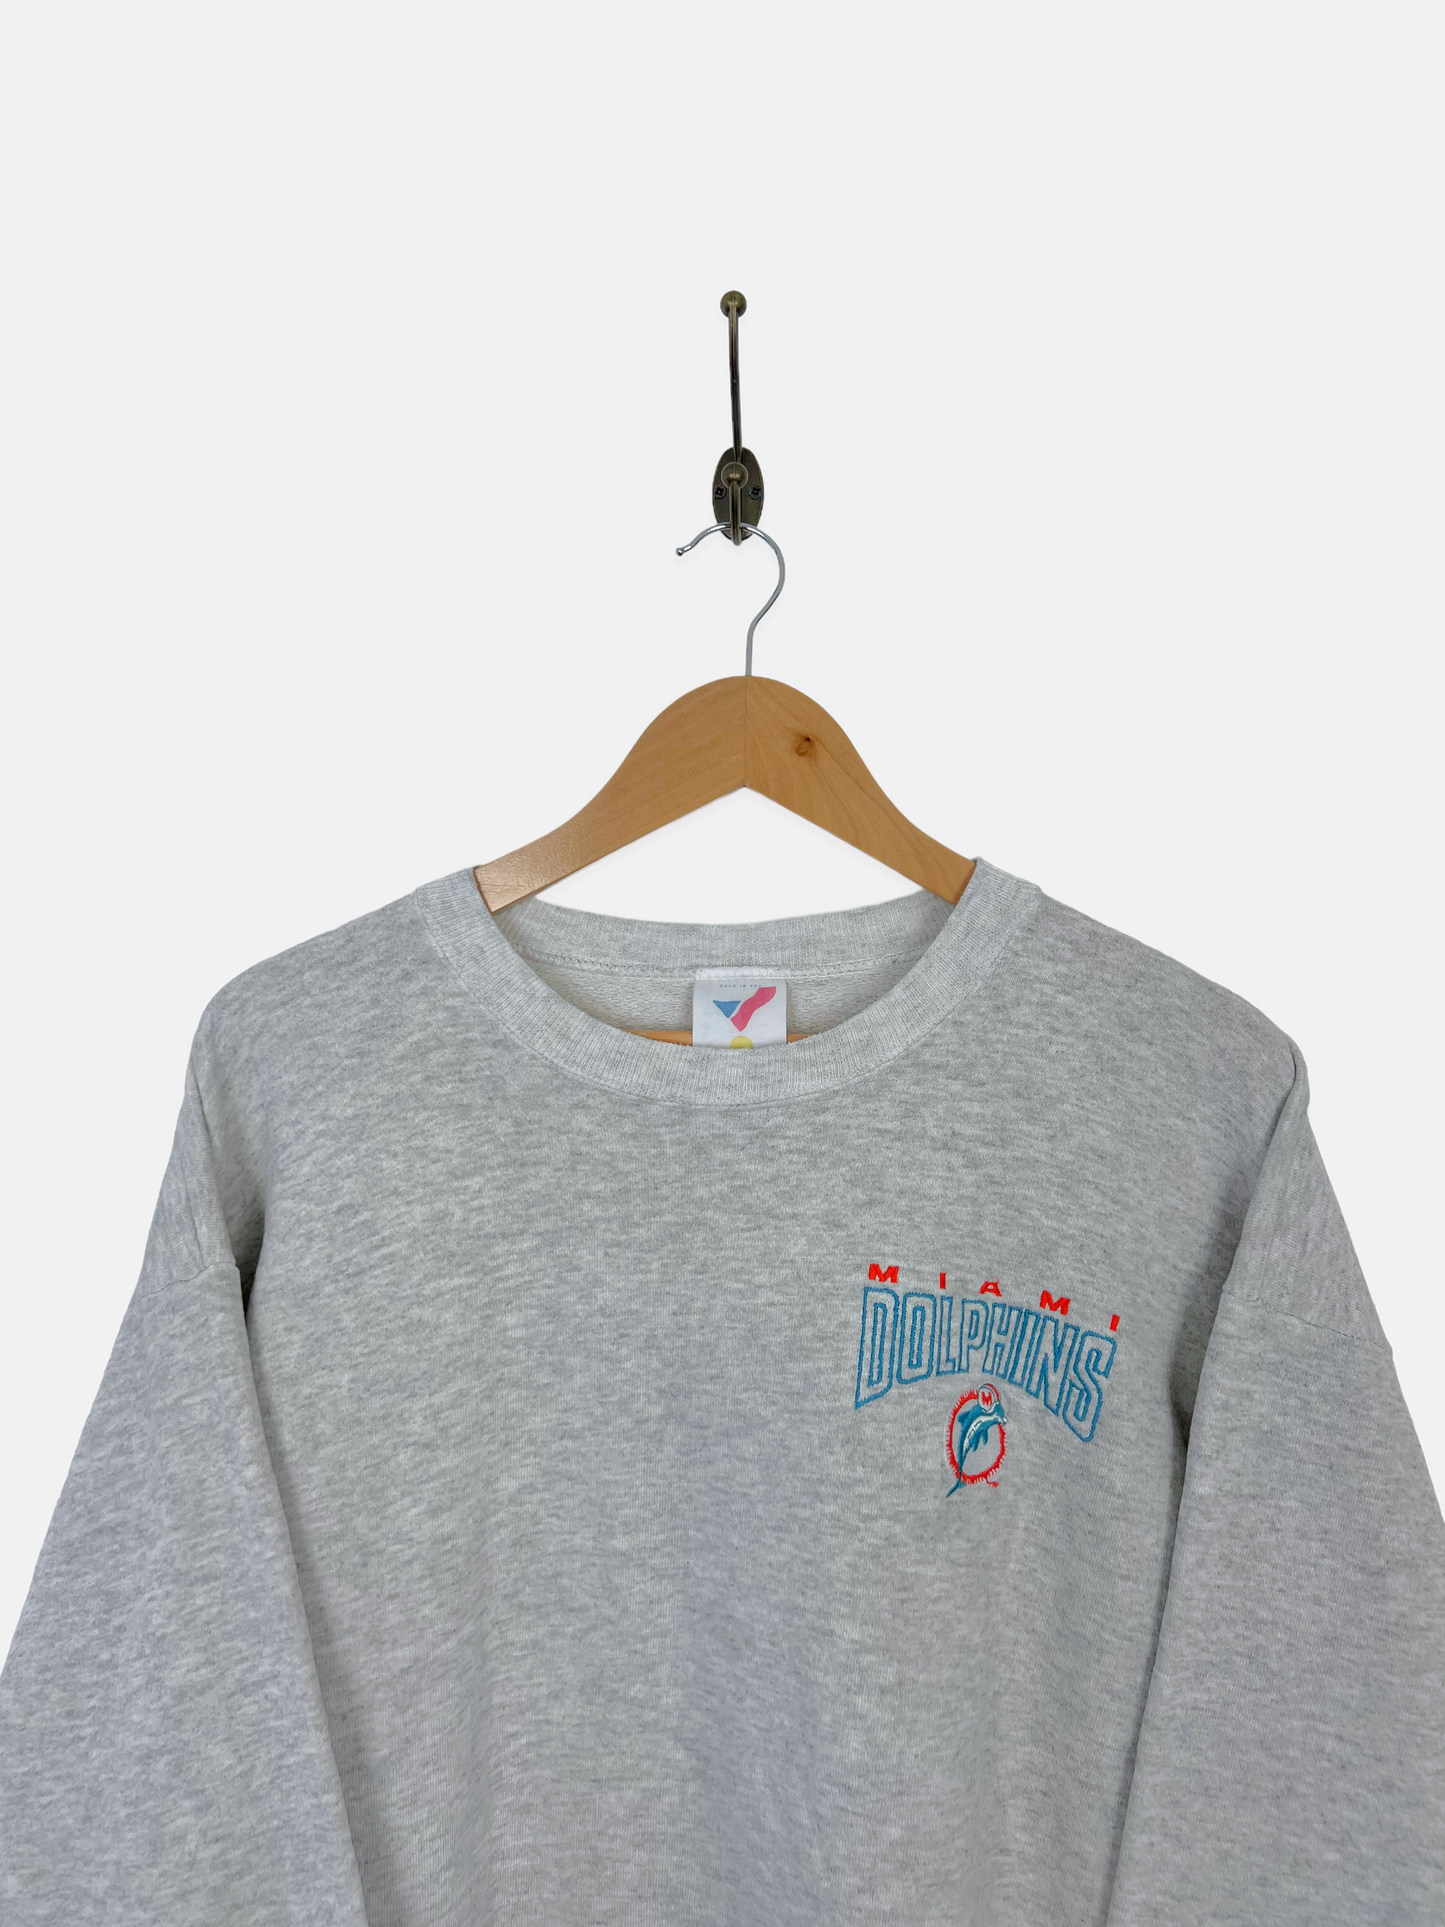 90's Miami Dolphins NFL USA Made Embroidered Vintage Sweatshirt Size M